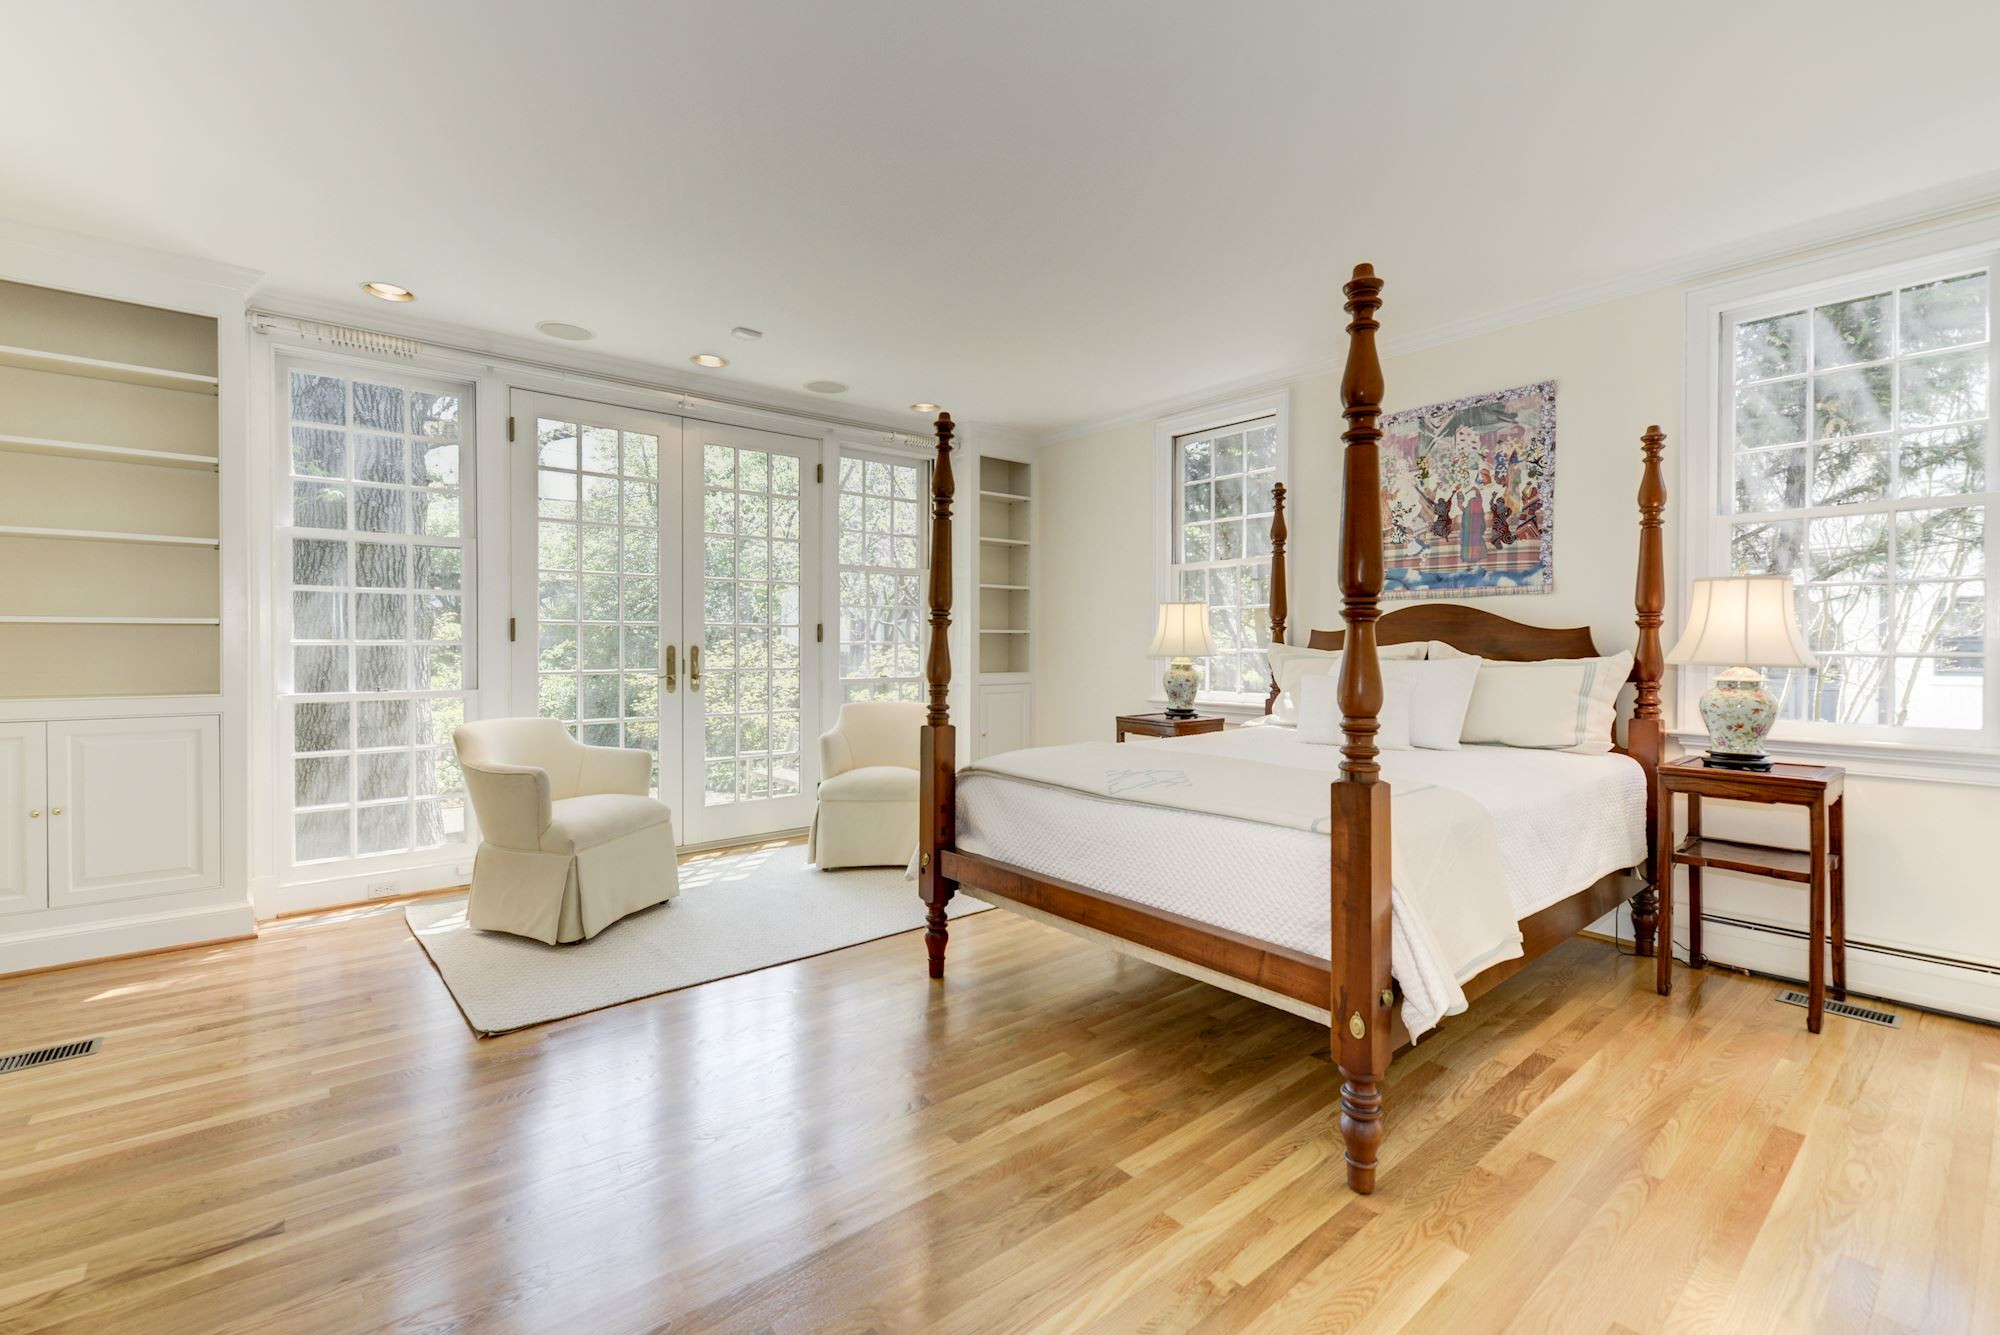 First Floor Master Bedroom
 22 PRIMROSE ST CHEVY CHASE MD